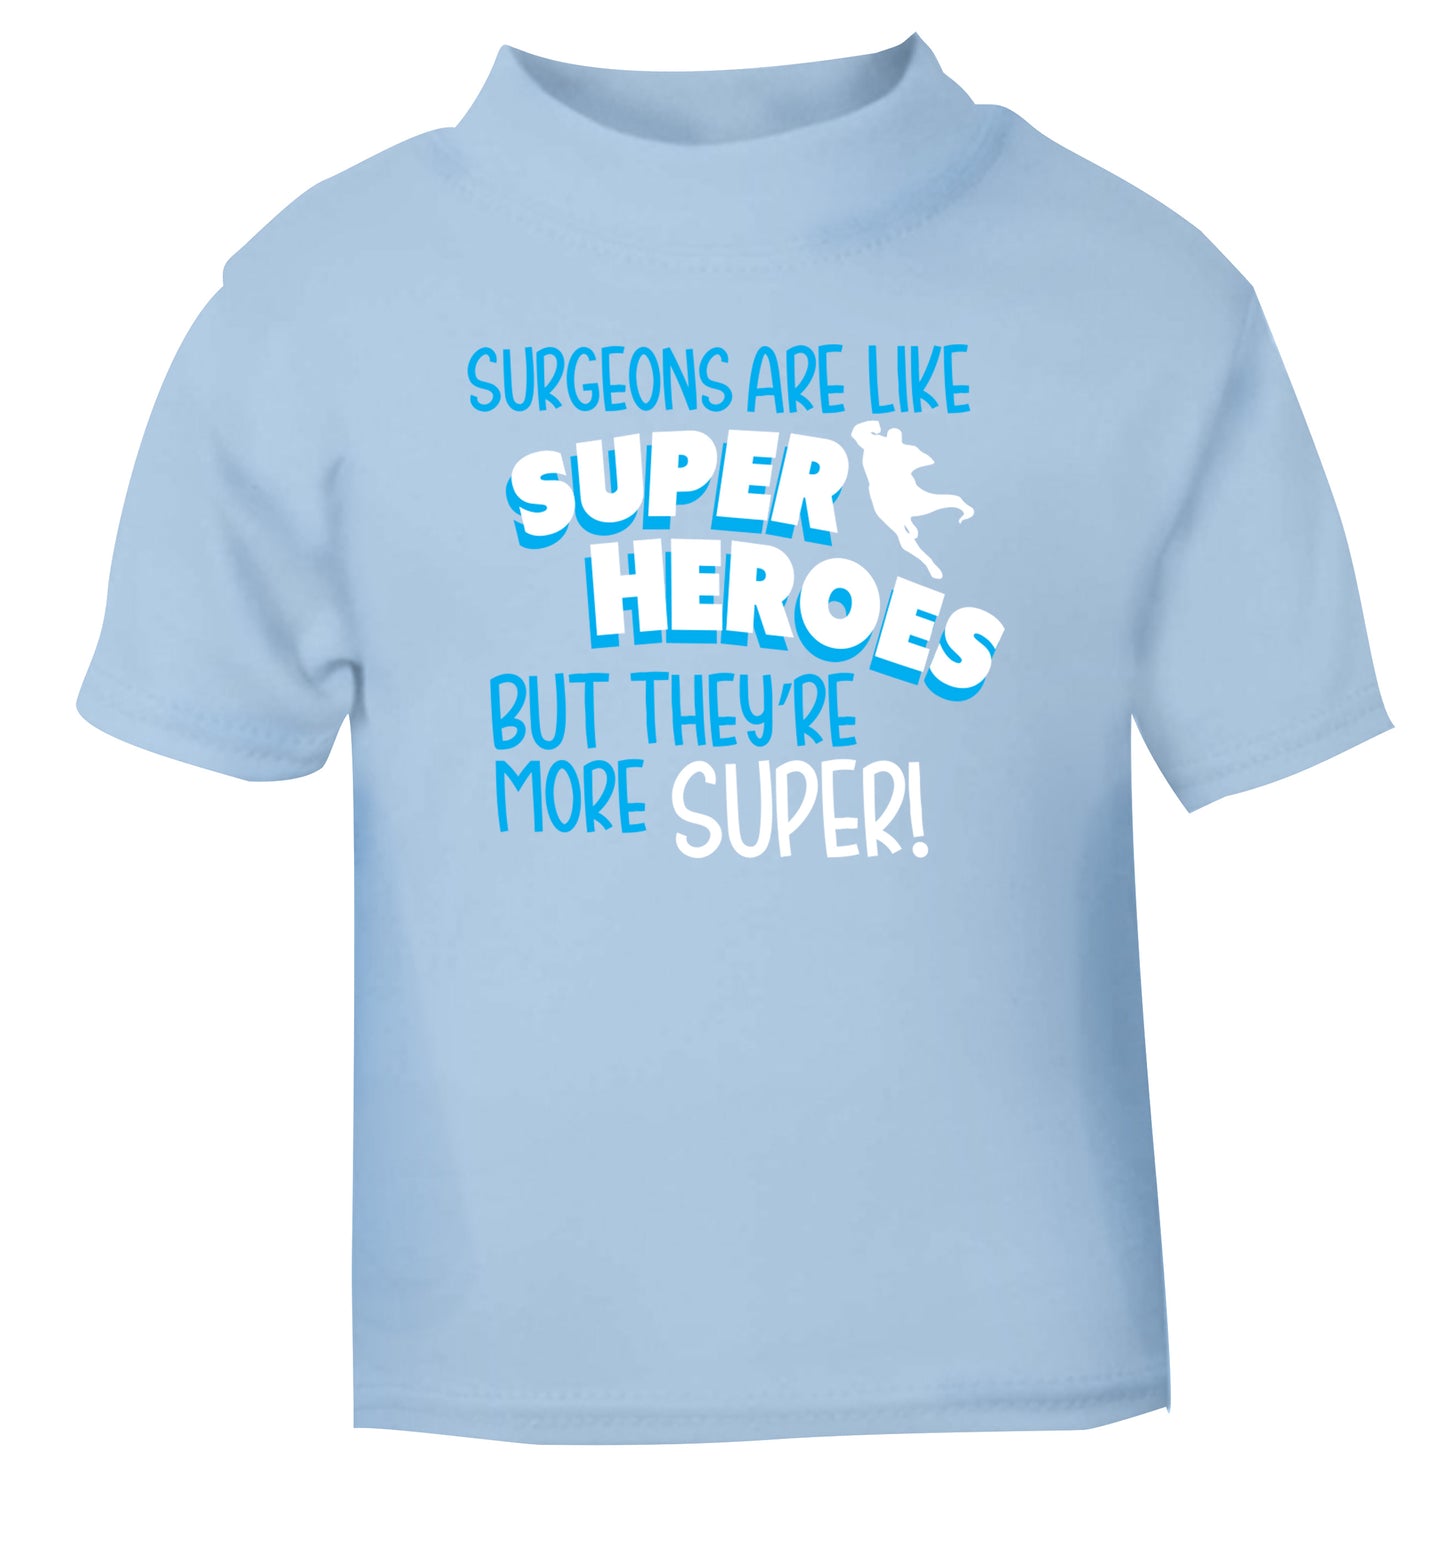 Surgeons are like superheros but they're more super light blue Baby Toddler Tshirt 2 Years